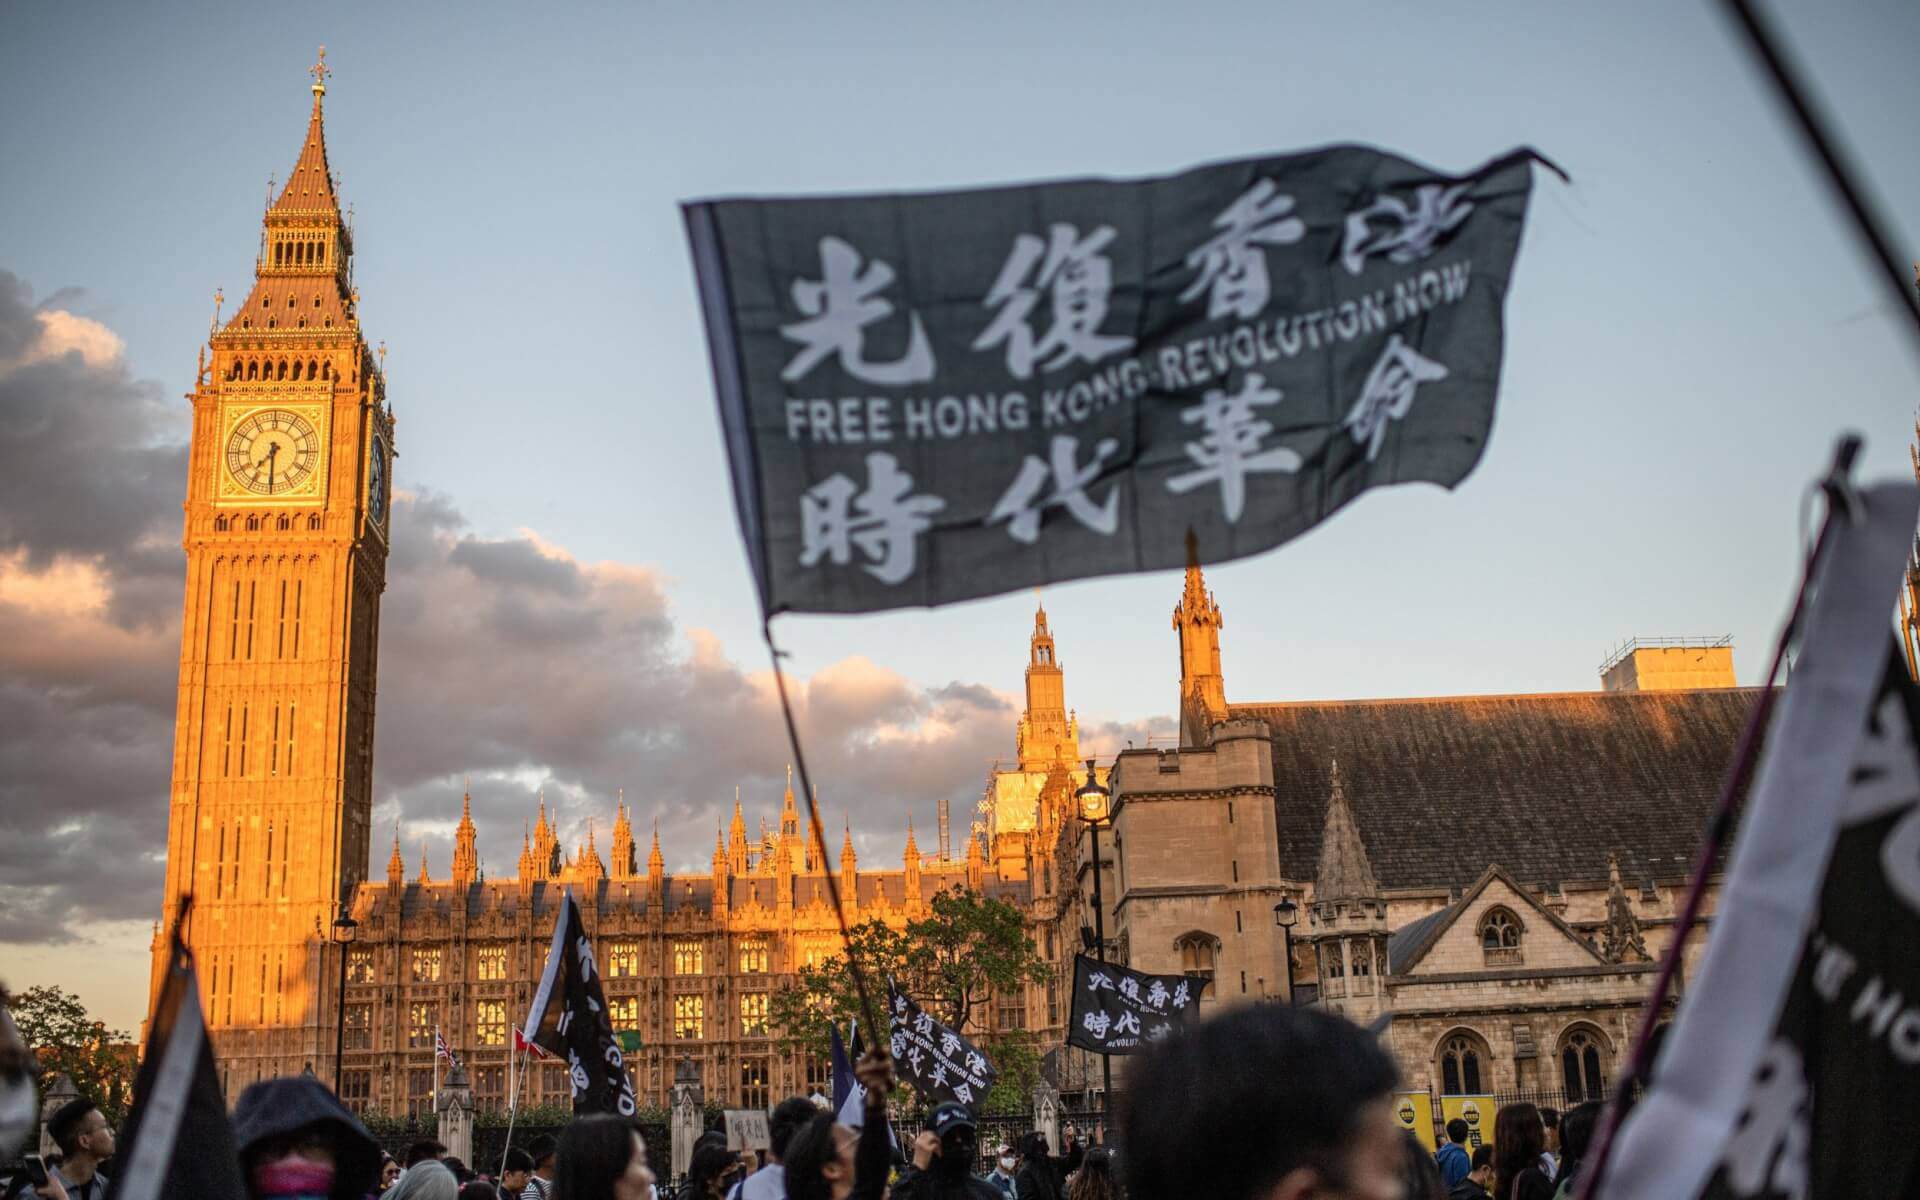 China Slams UK Report Alleging Curtailing of Freedoms, Protections in Hong Kong